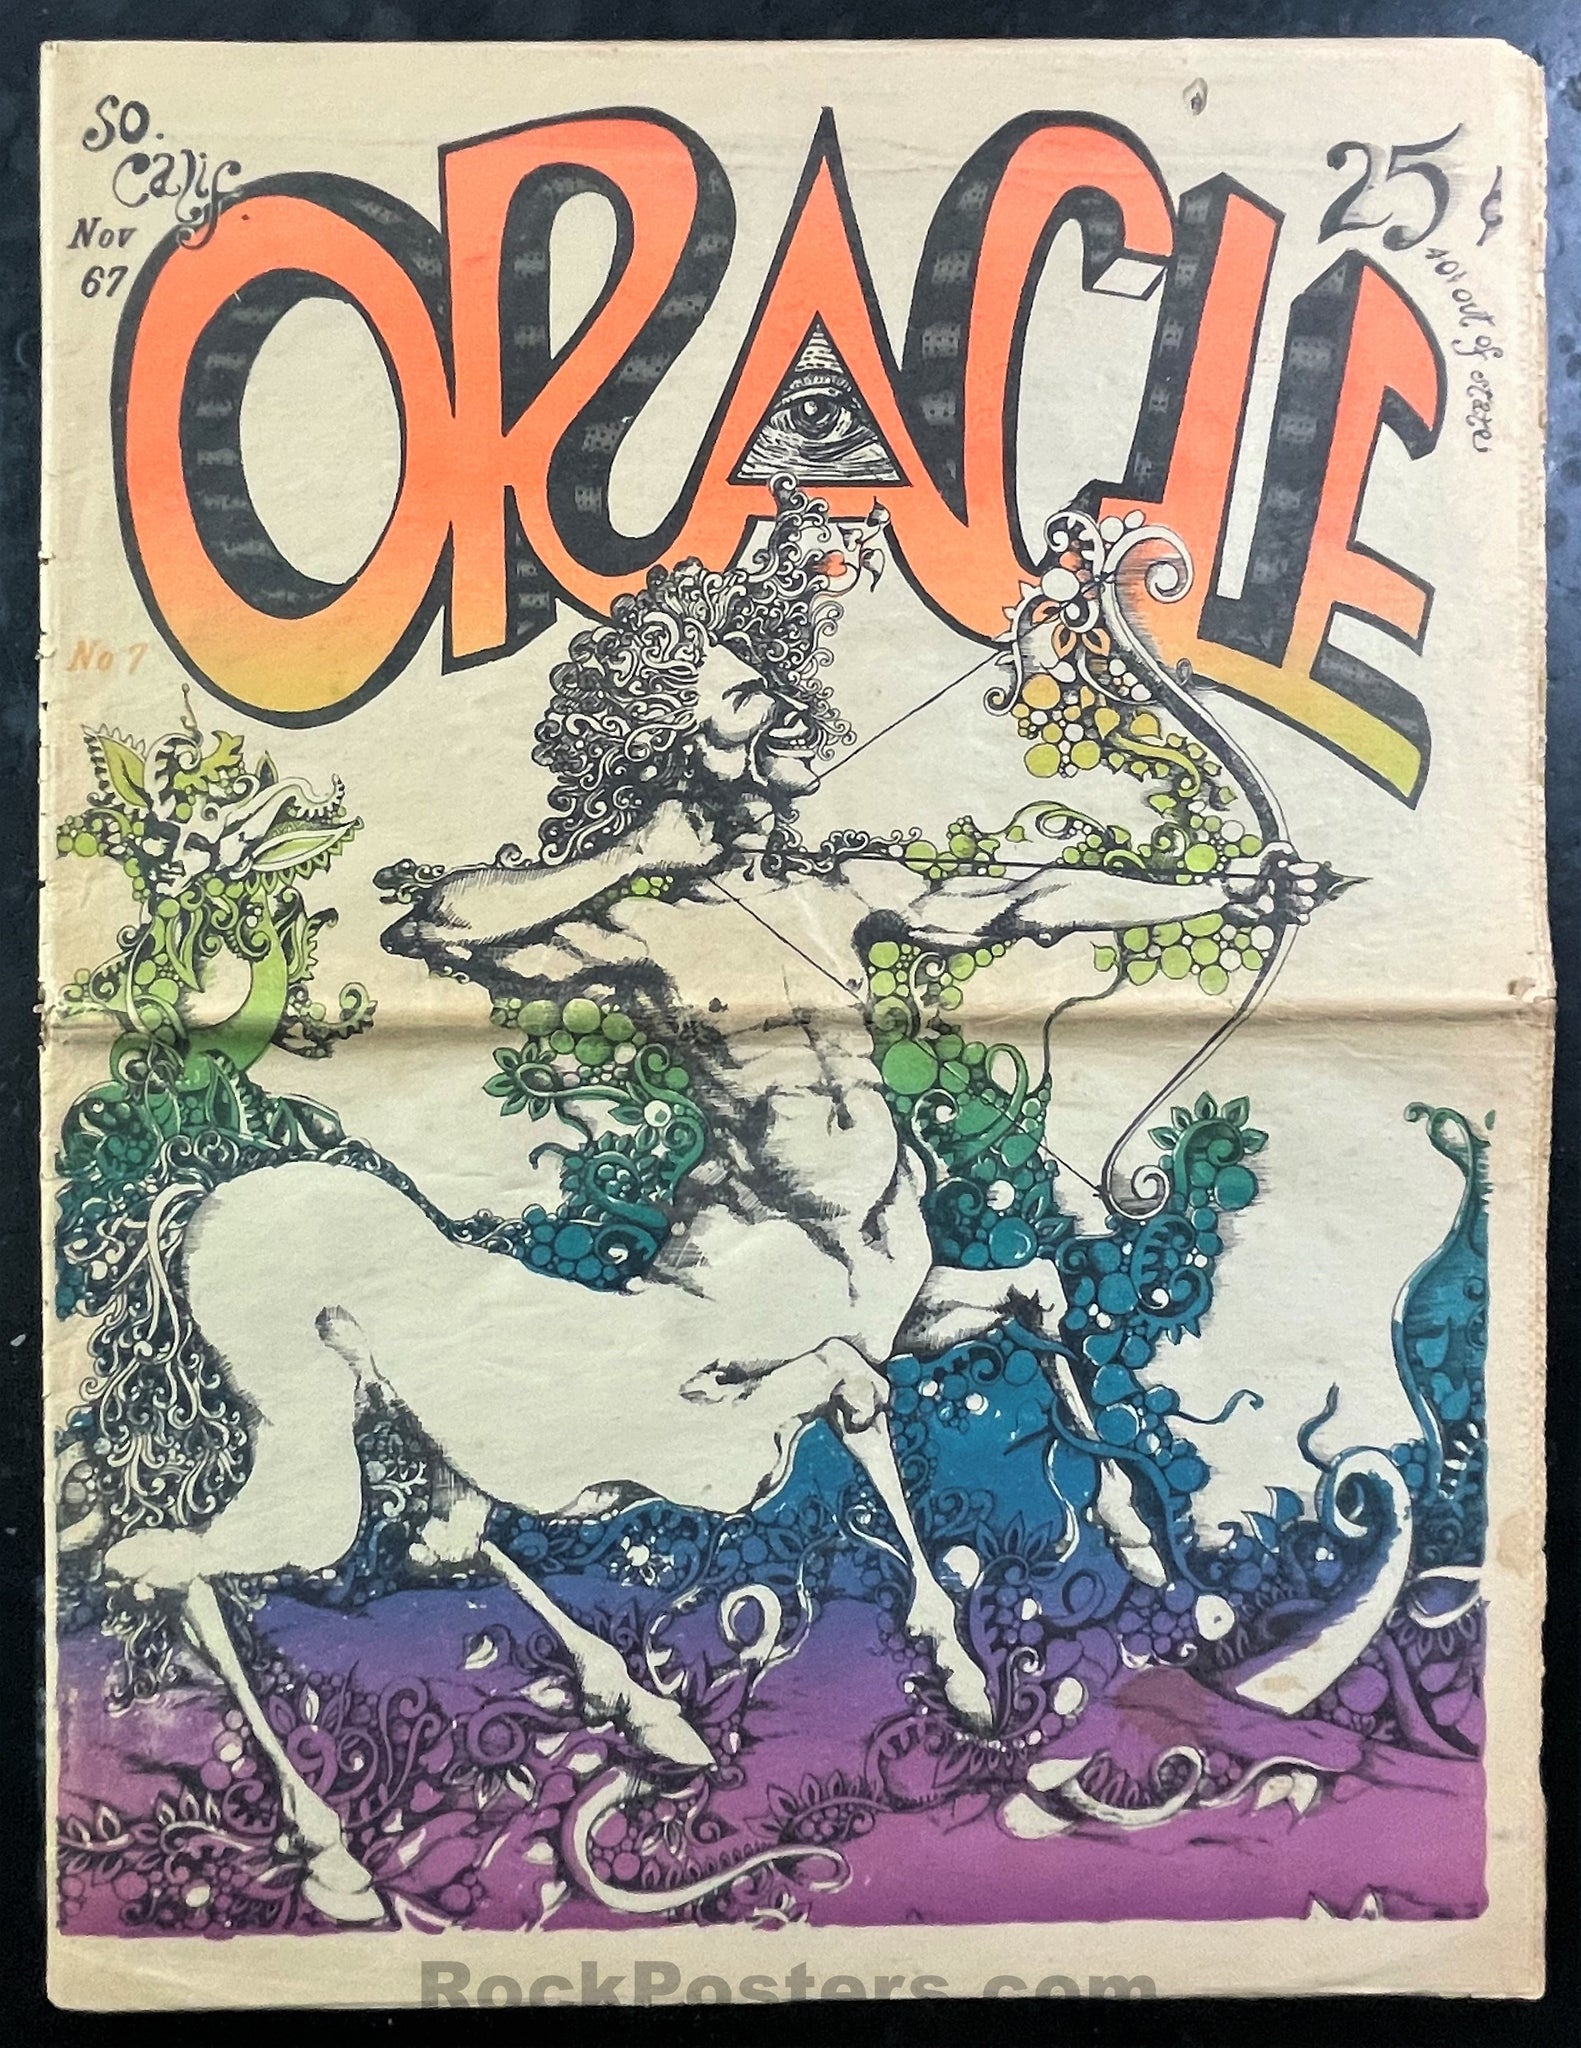 AUCTION - So. Cal. Oracle No. 7 - 1967 Underground Newspaper - Excellent